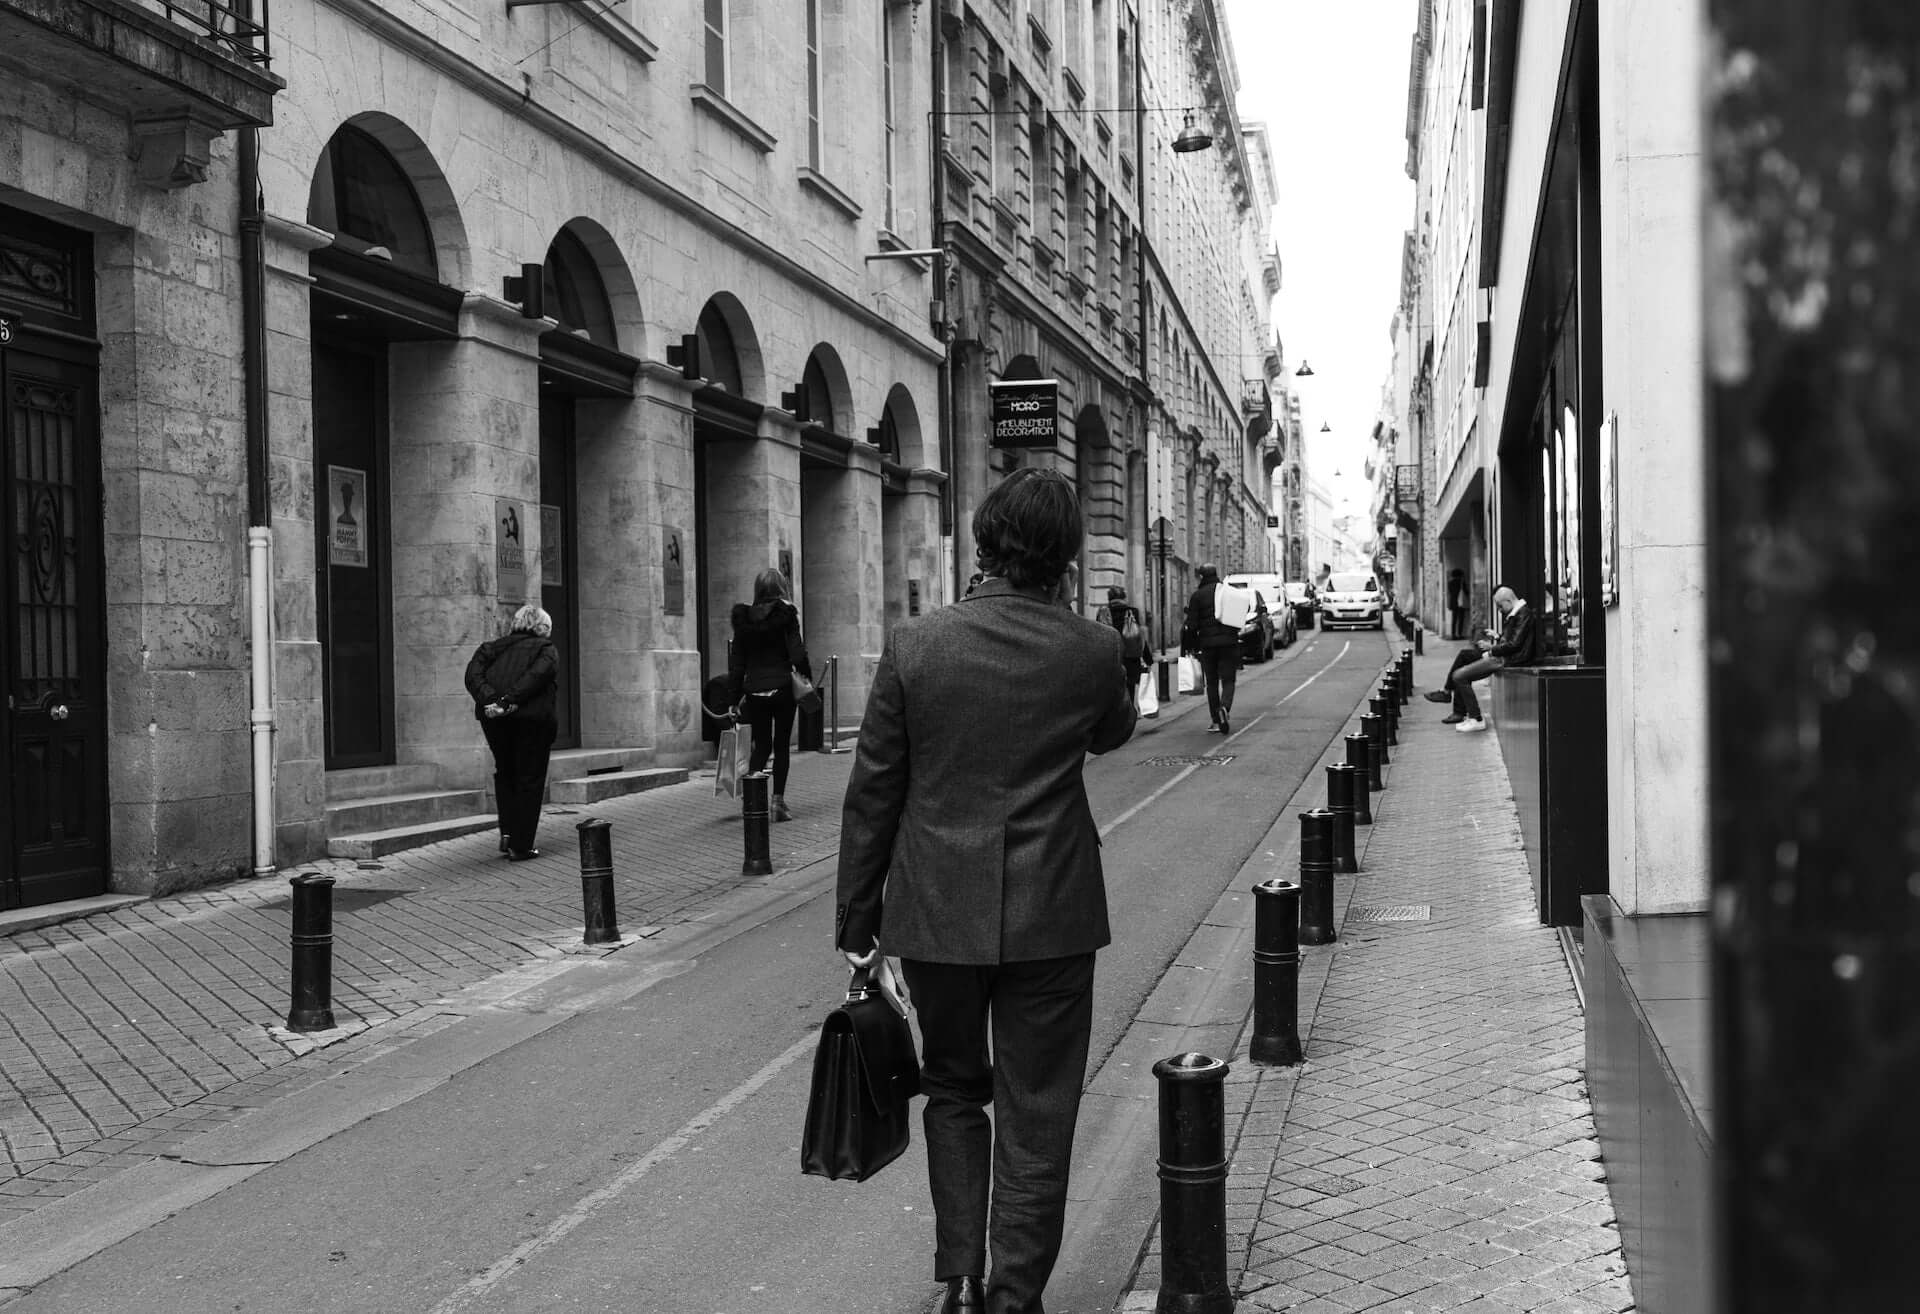 A person holding a briefcase walks down a city street. The image is in black and white.